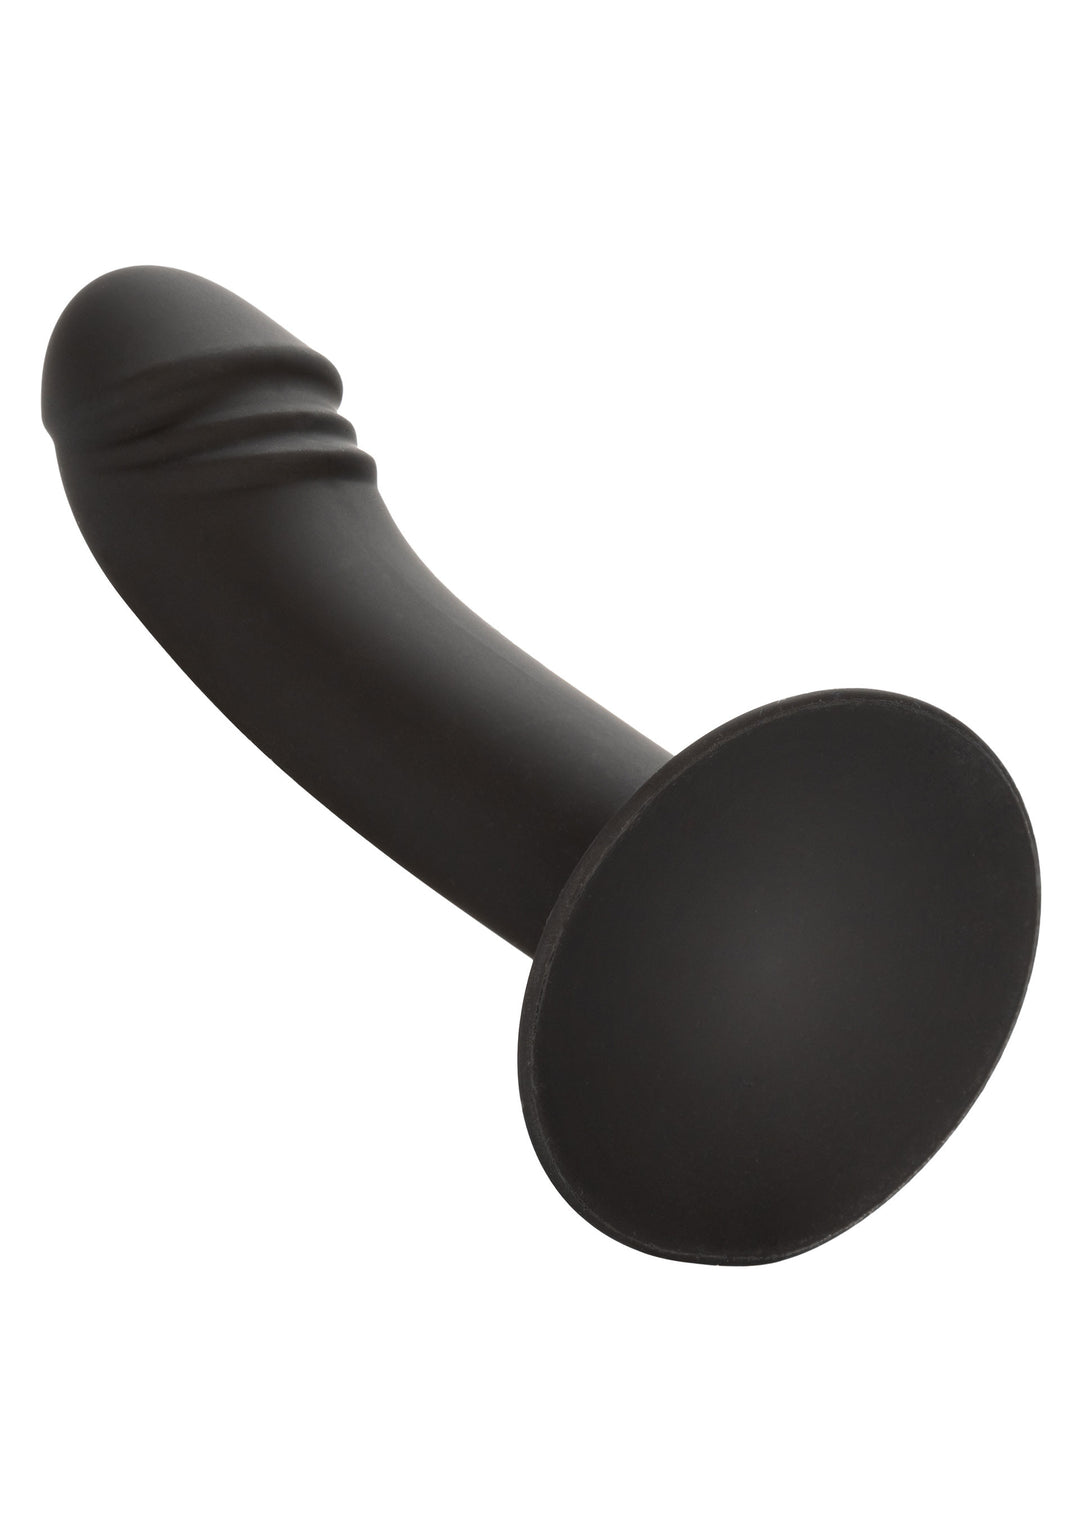 Fallo anale Curved Anal Stud